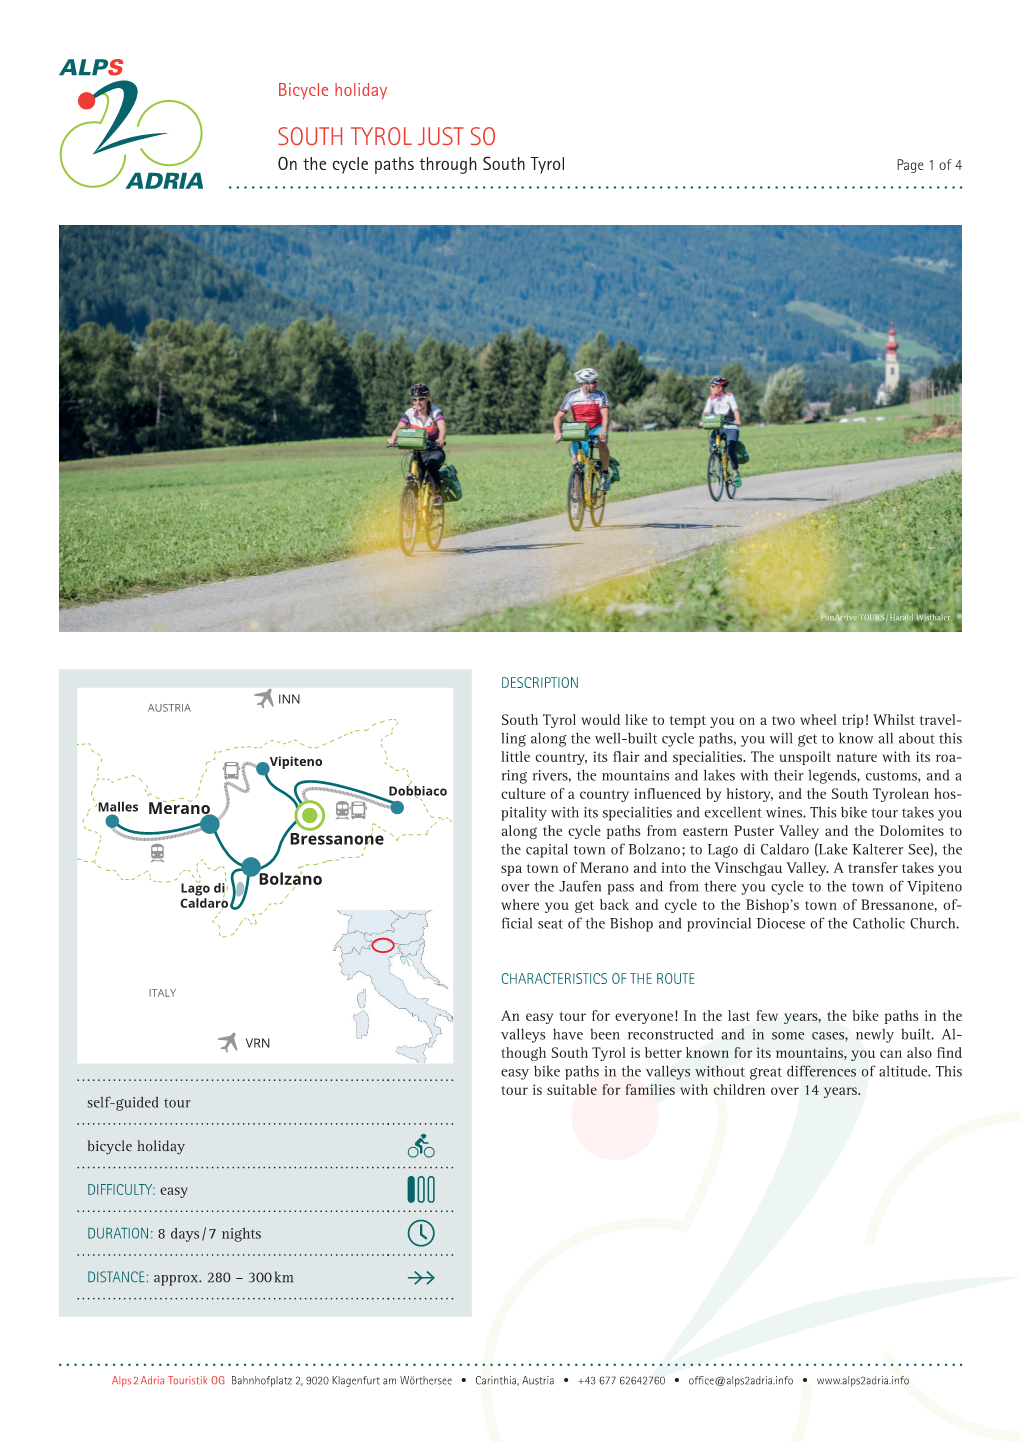 SOUTH TYROL JUST SO on the Cycle Paths Through South Tyrol Page 1 of 4